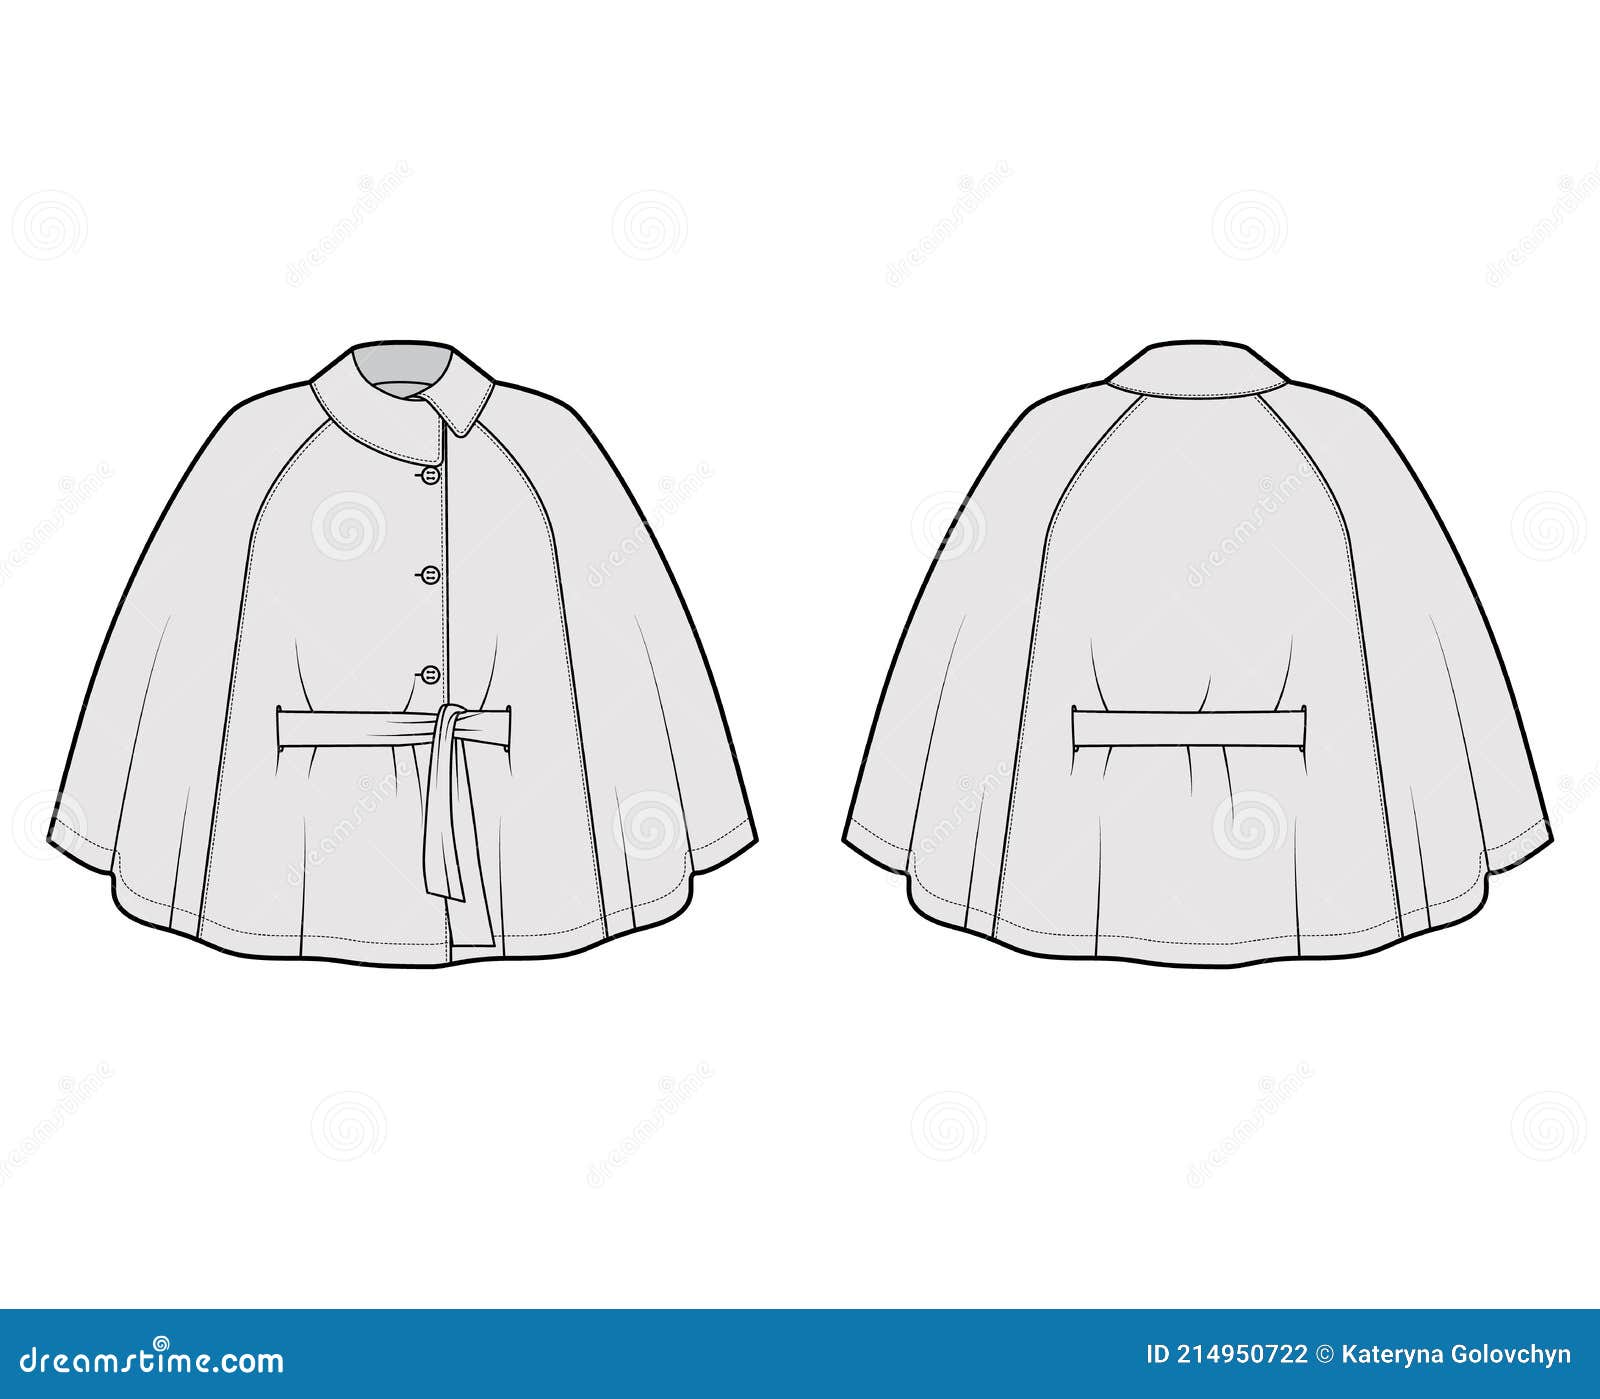 Poncho coat technical fashion illustration with v-neck collar, oversized  trapeze body, fingertip length. flat jacket template | CanStock